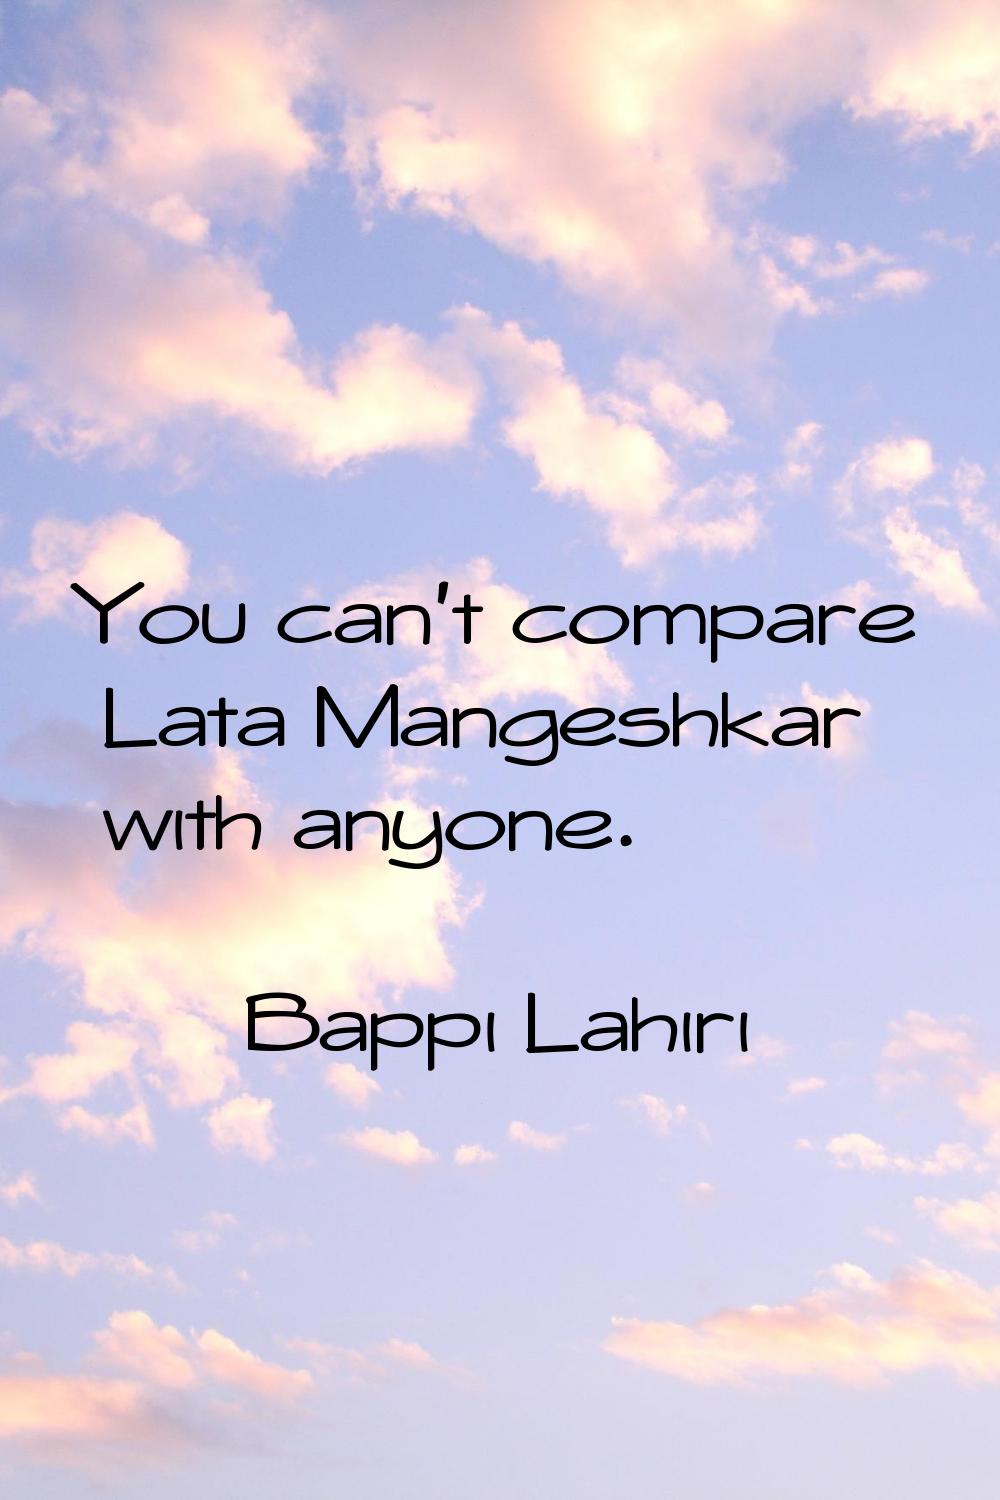 You can't compare Lata Mangeshkar with anyone.